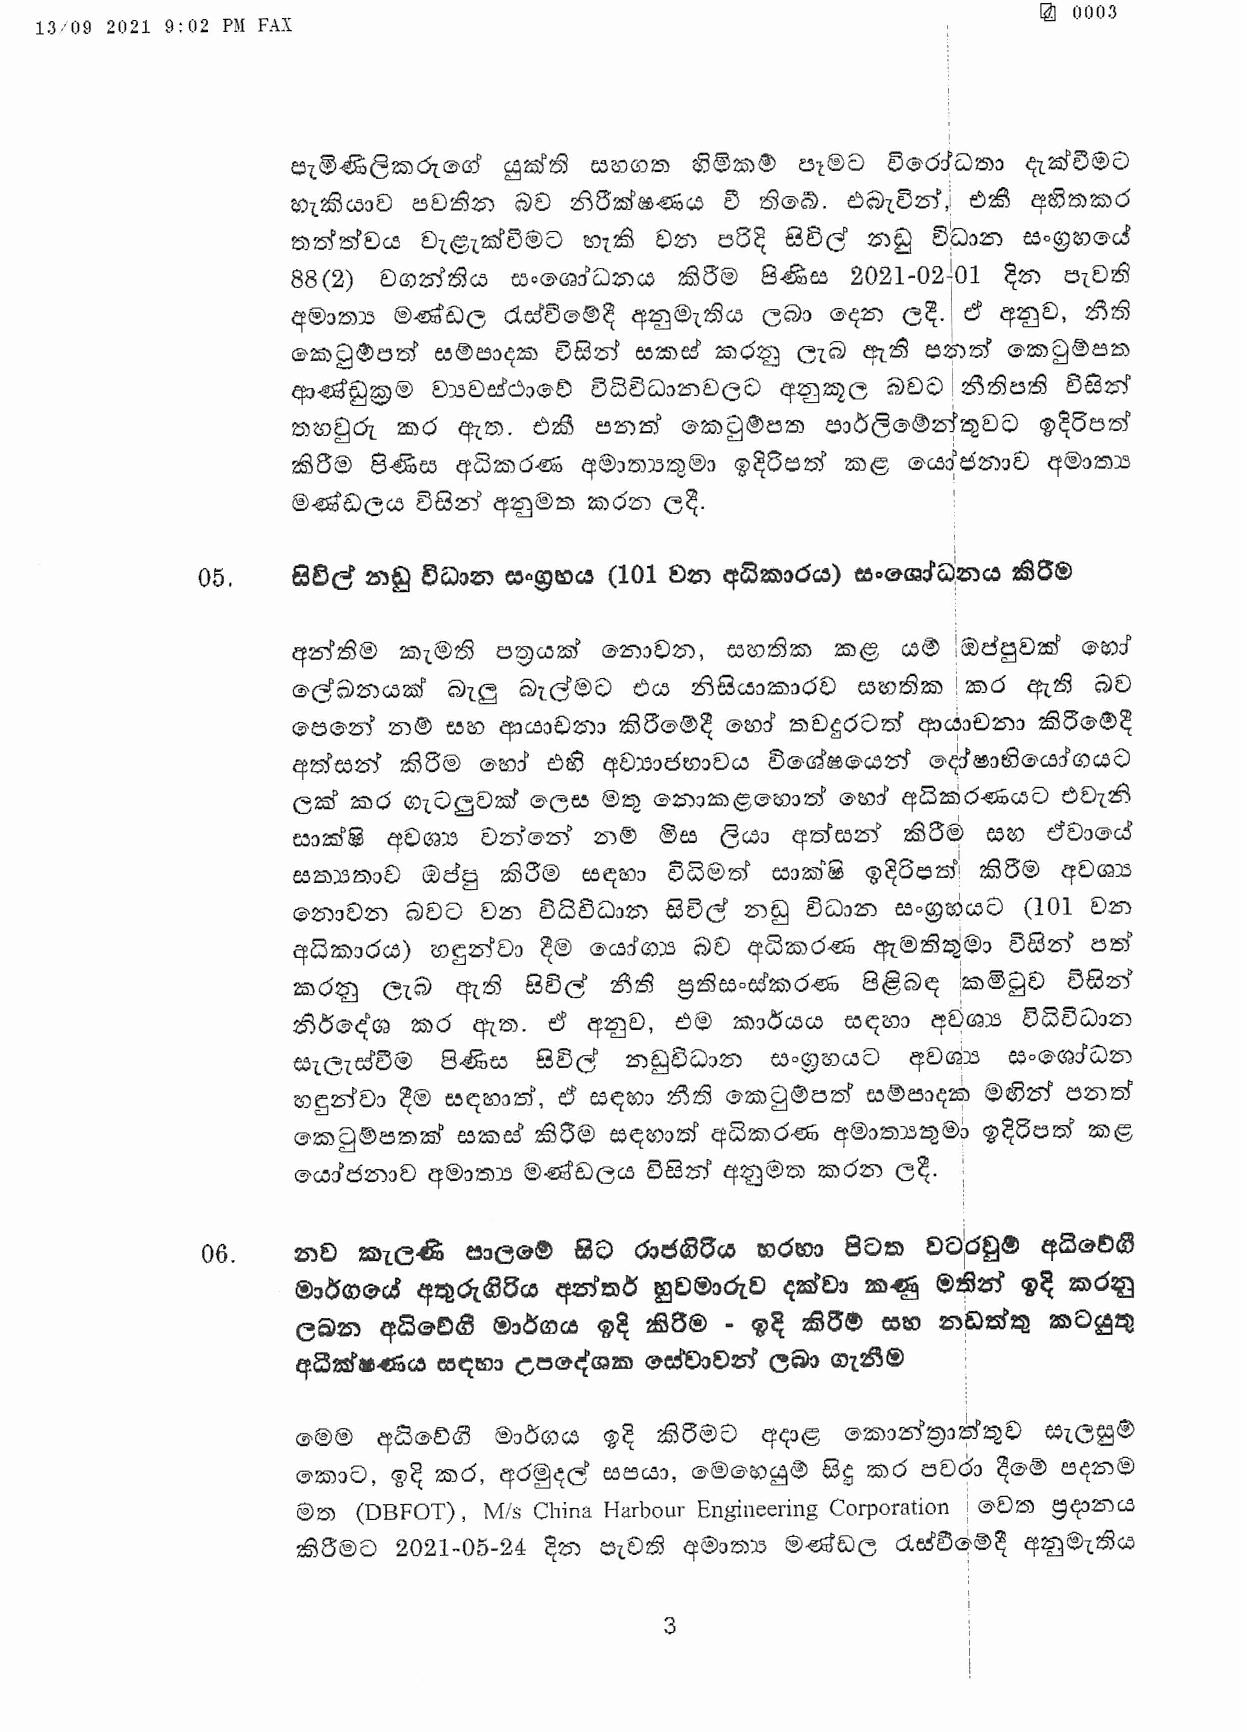 Cabinet Decision on 13.09.2021 page 003